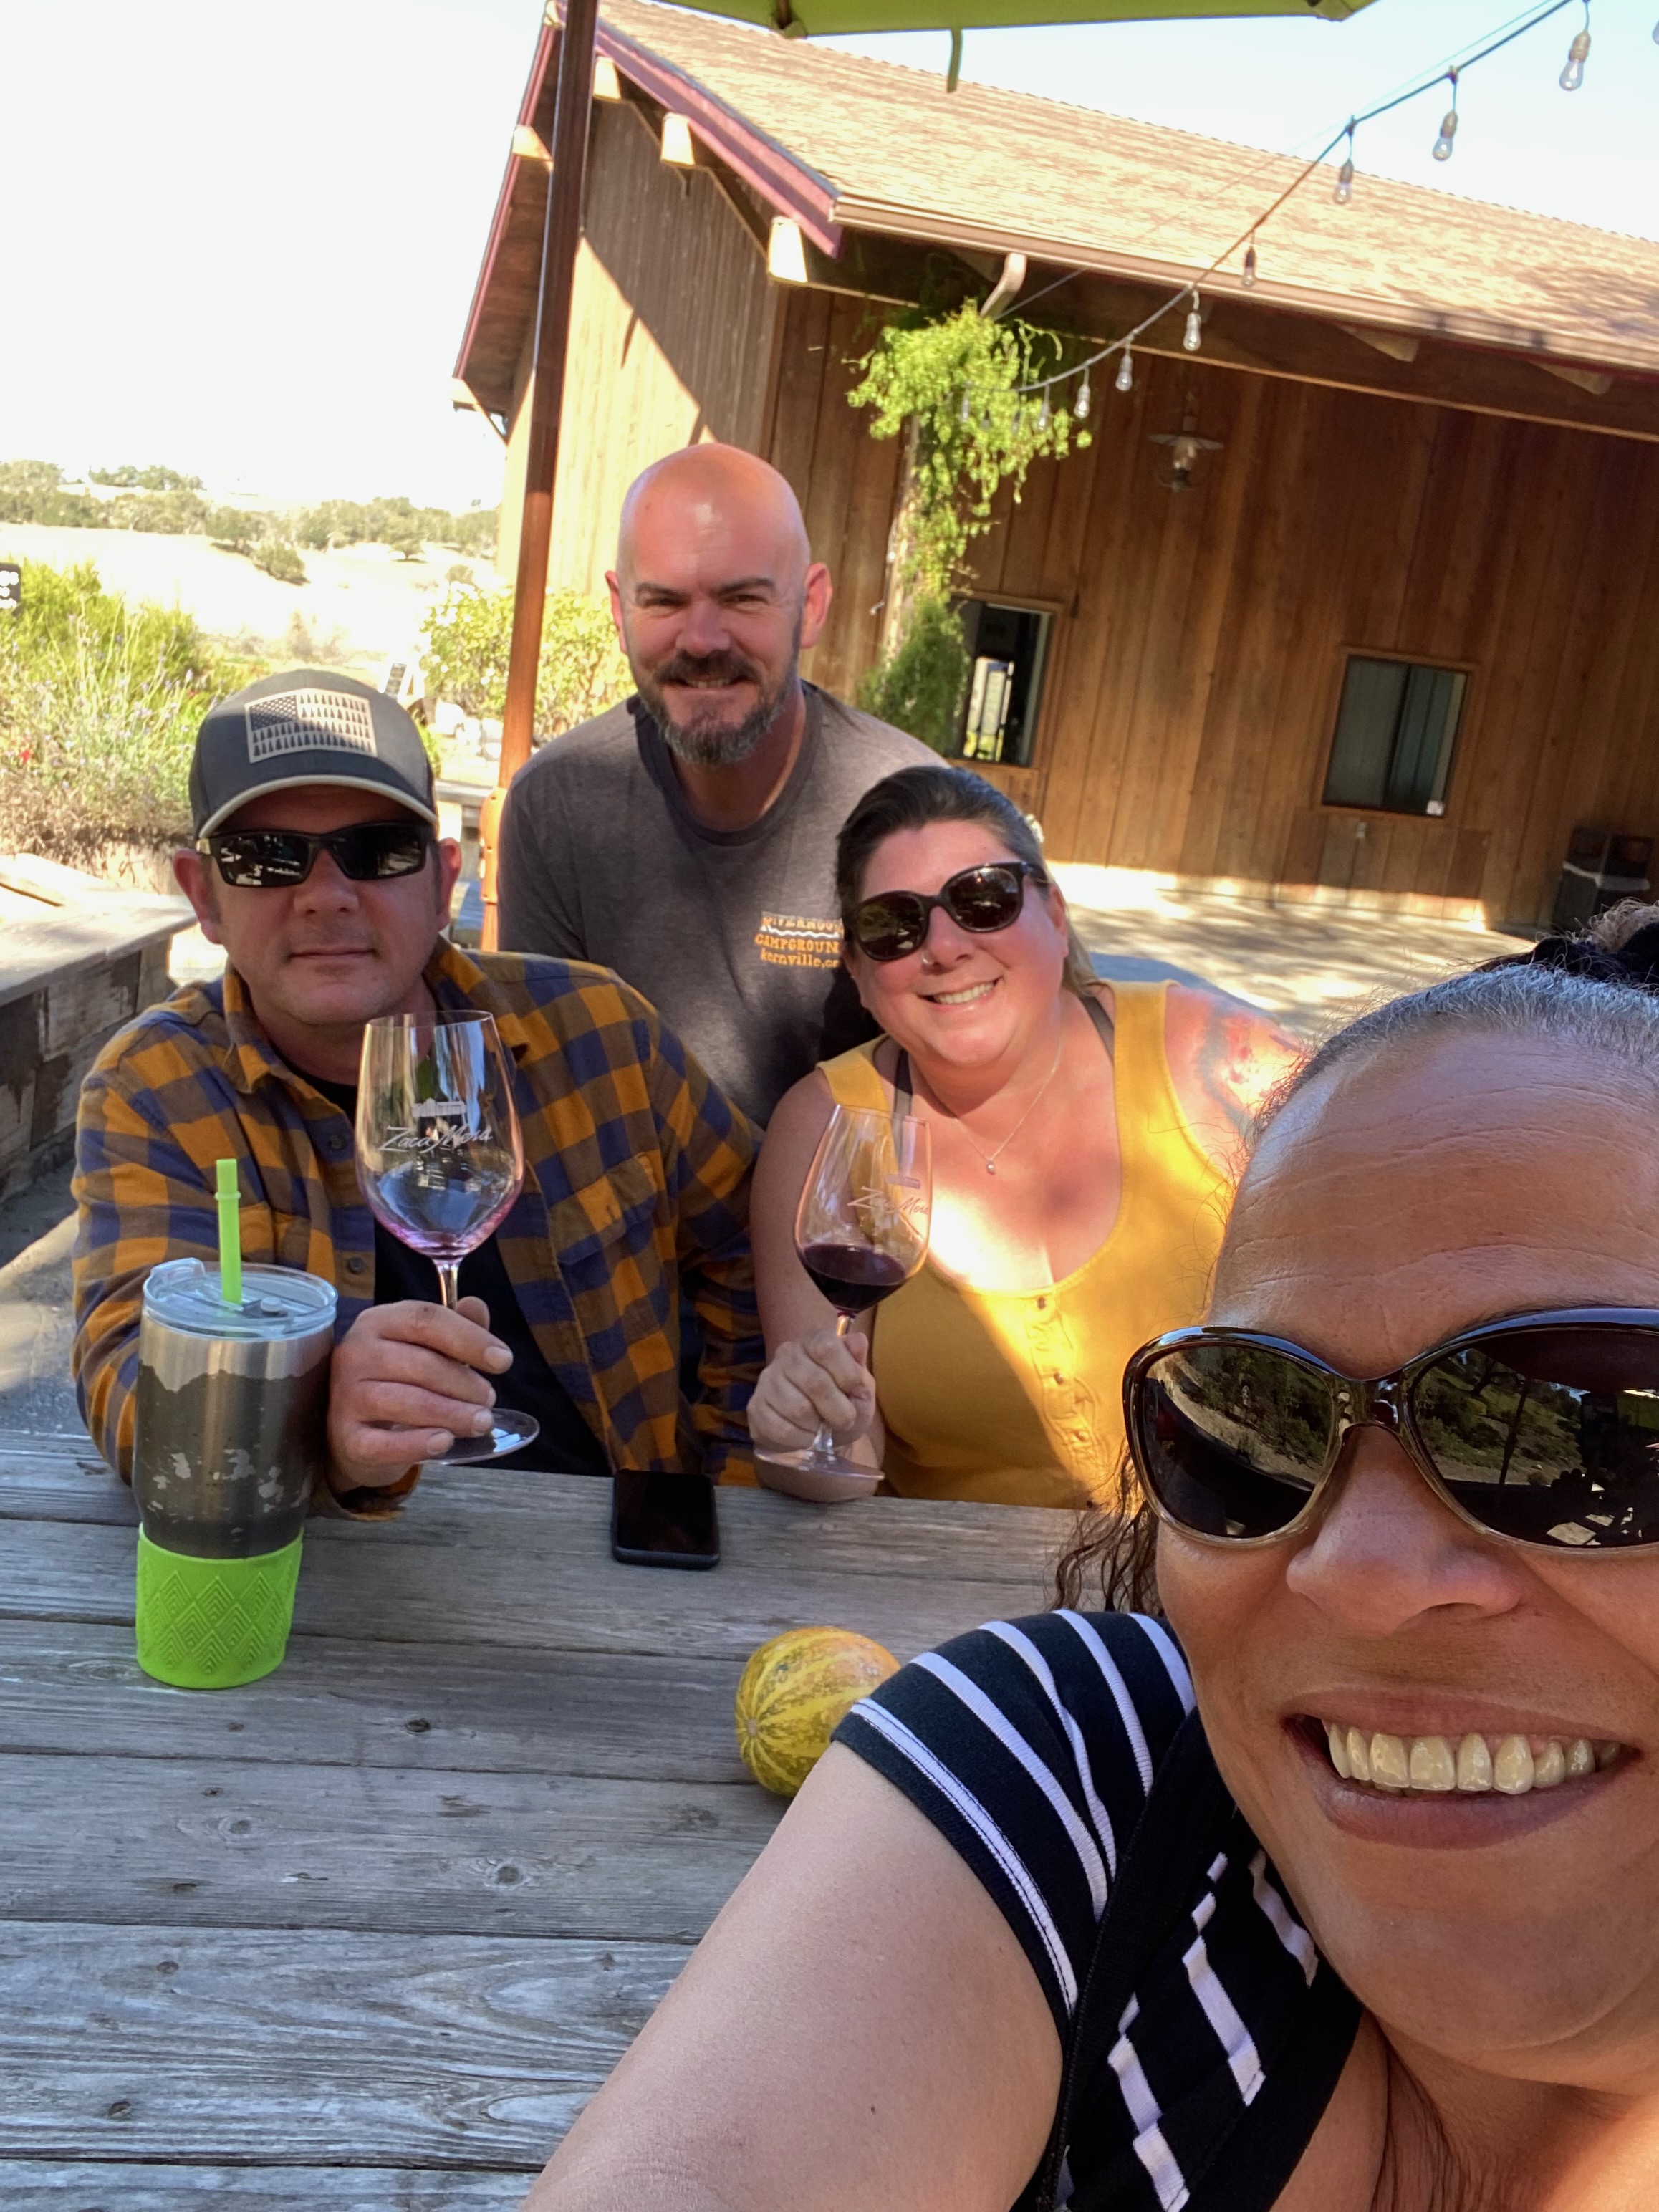 Our wine tasting excursion was amazing.